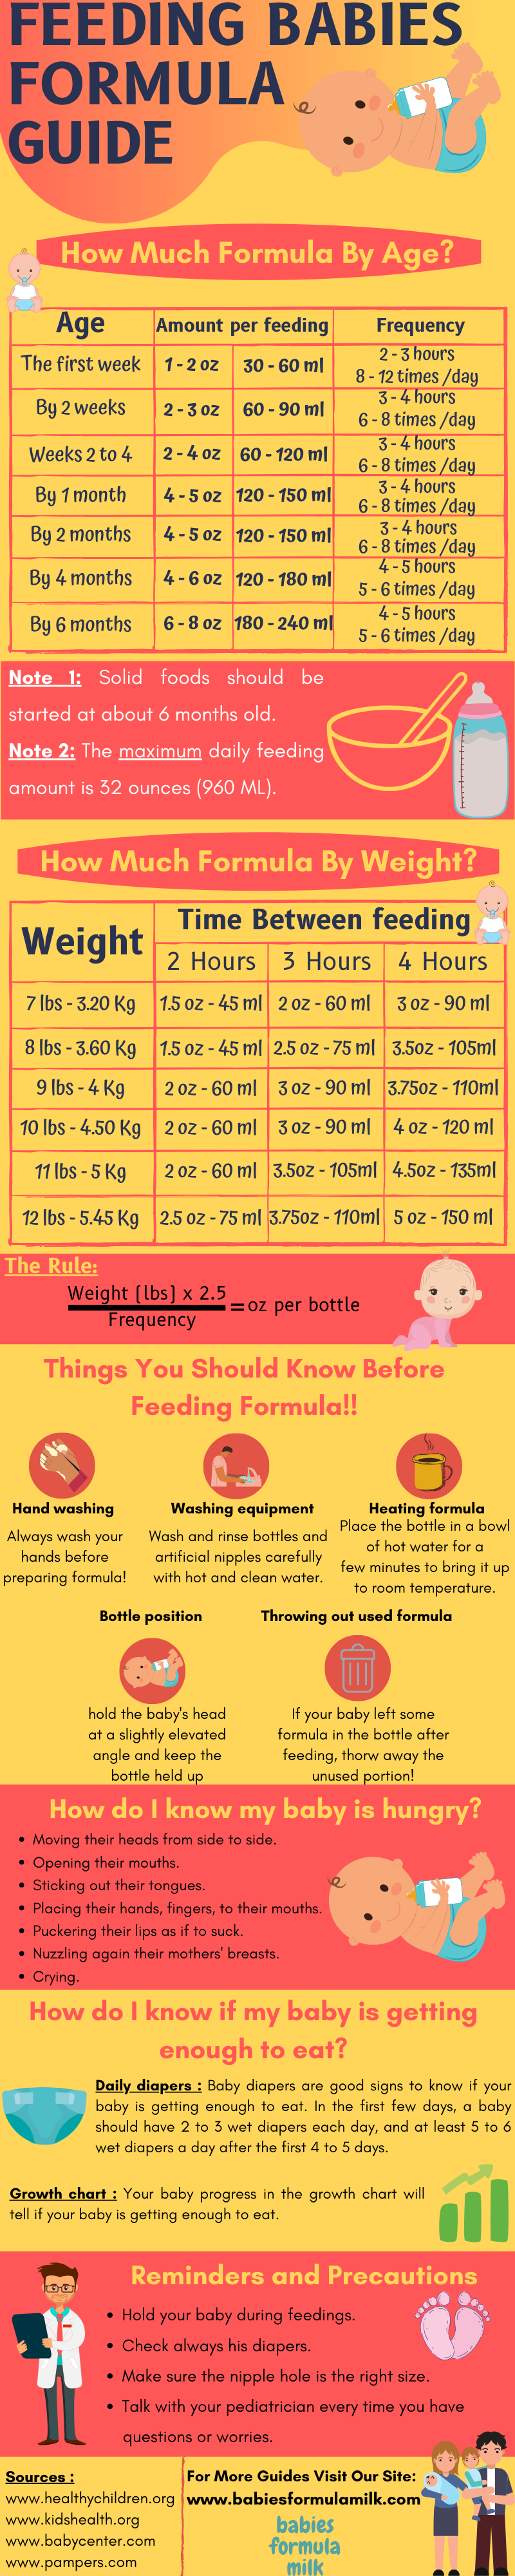 How Much Formula Should a Baby Eat: The Ultimate Guide | Babies Formula